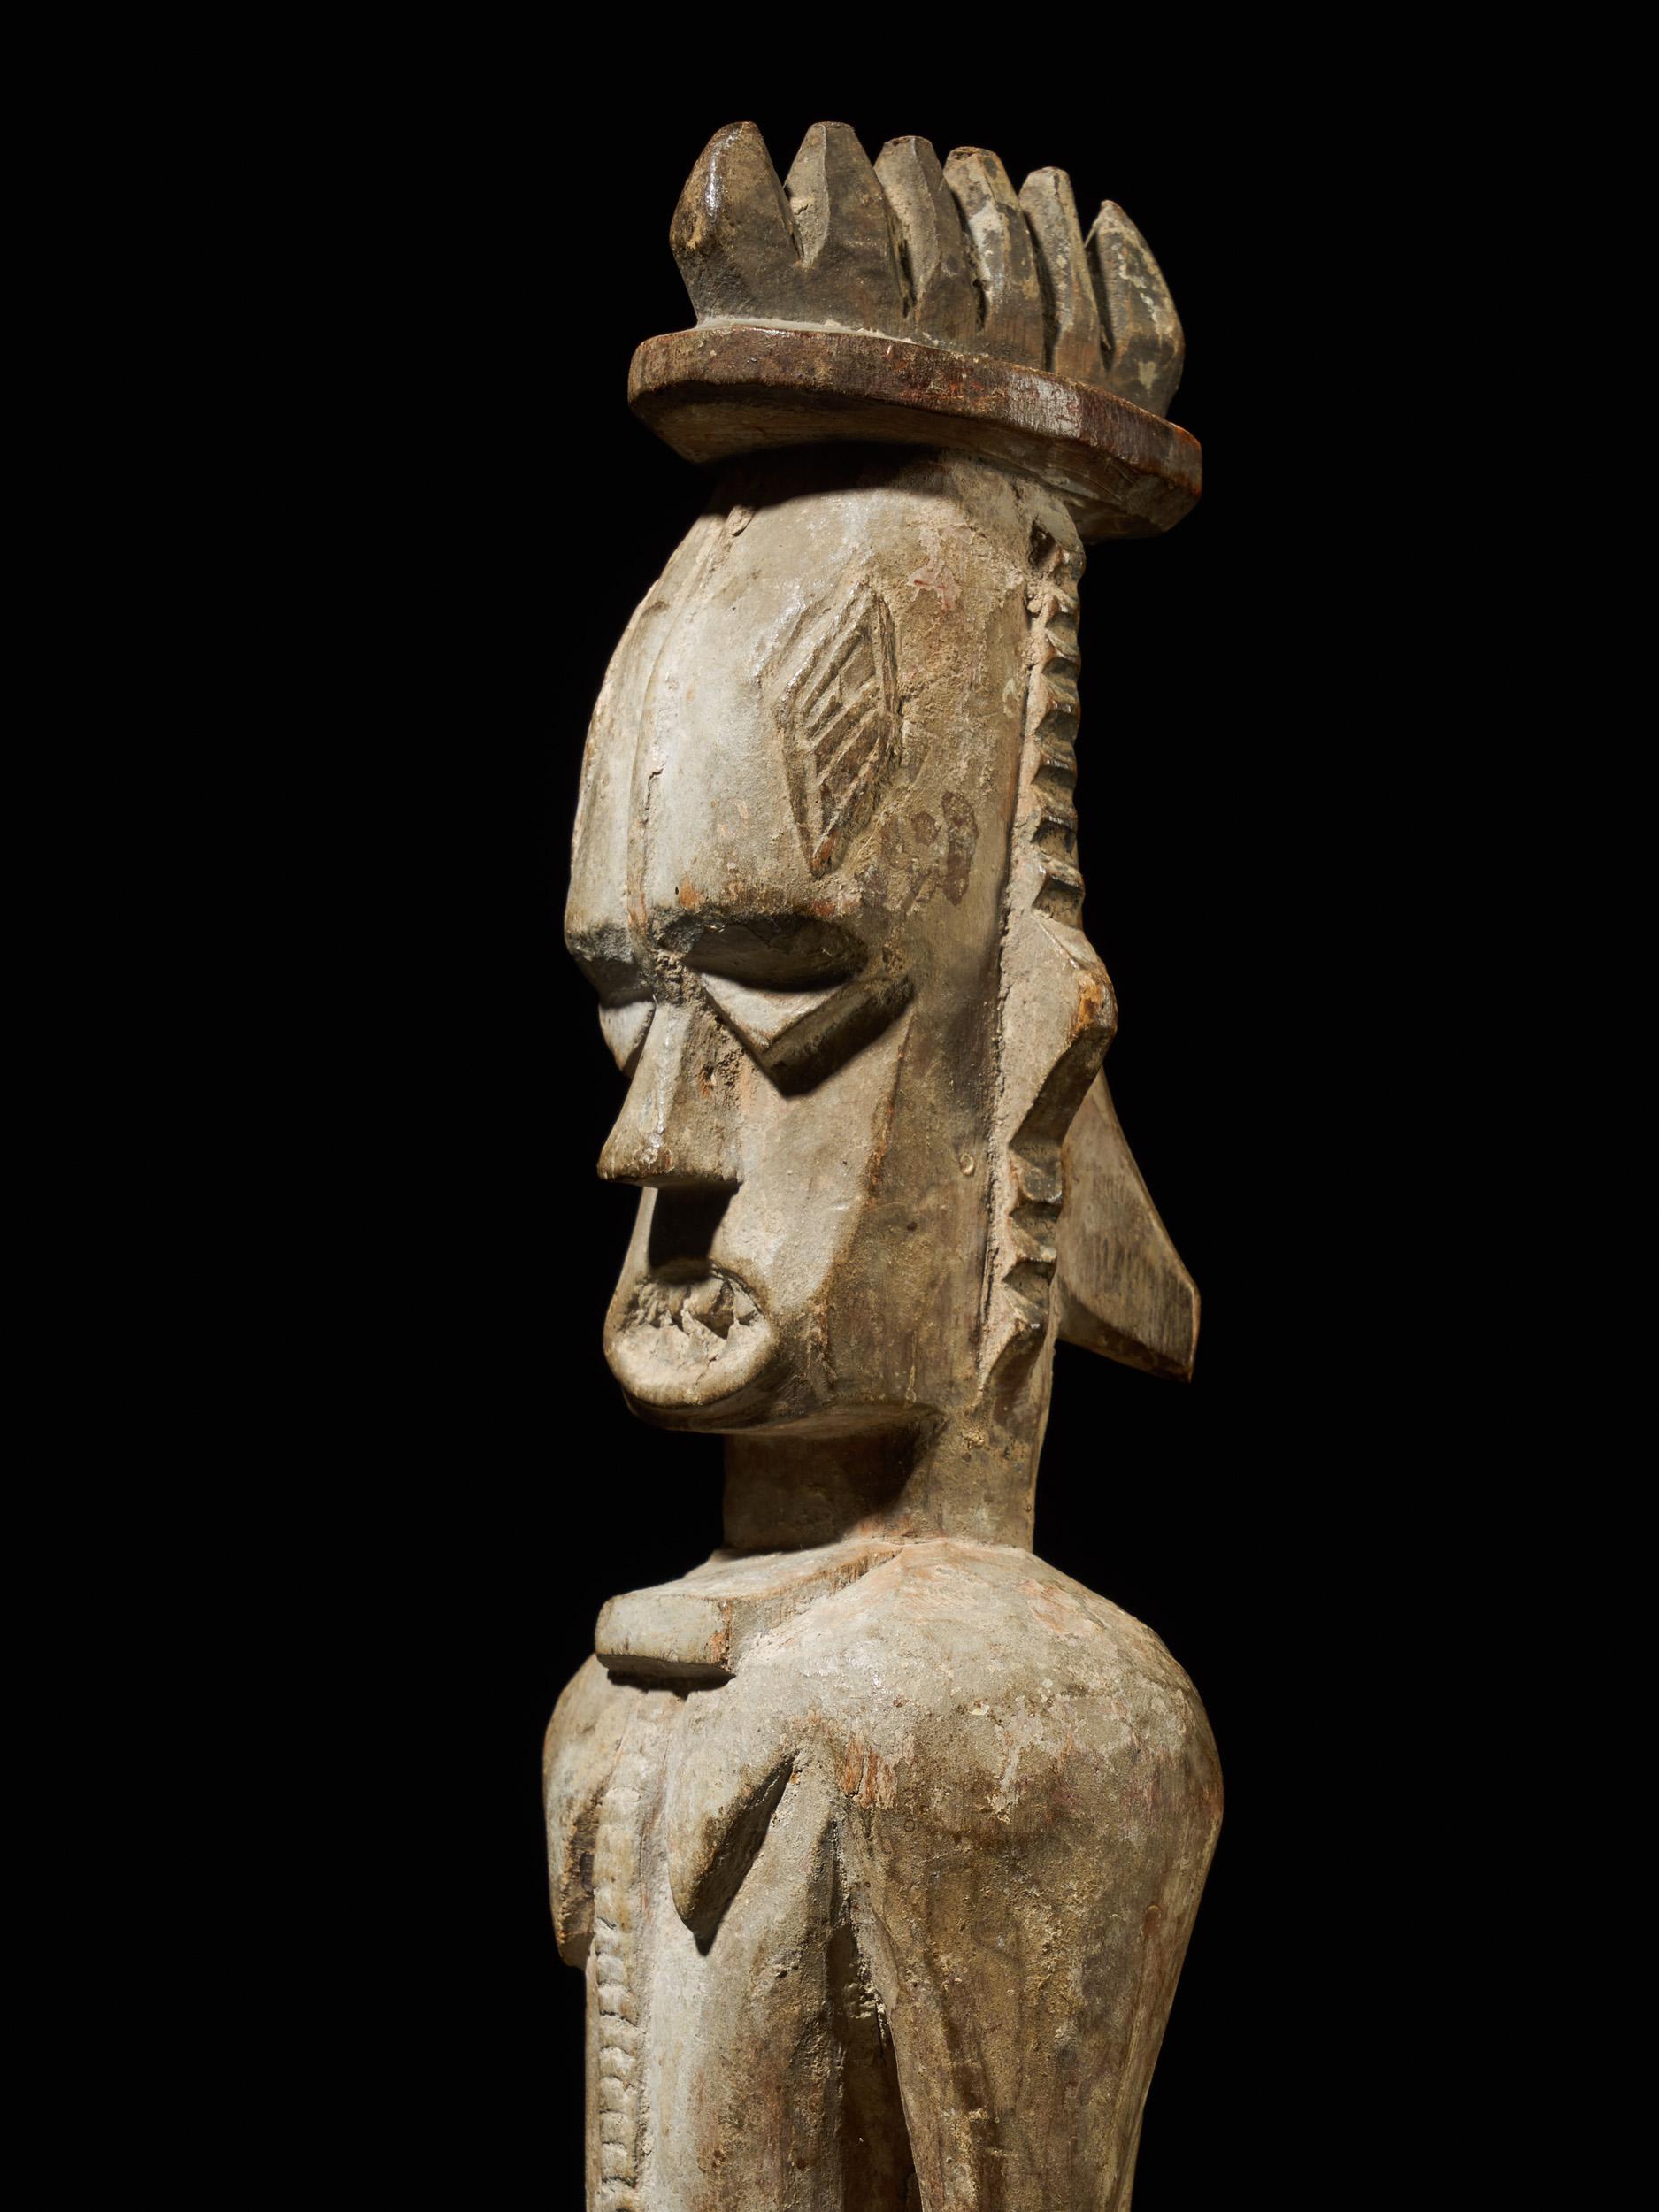 Nigerian Urhobo People, Nigeria, Family Ancestor Statue with Rests of Kaolin